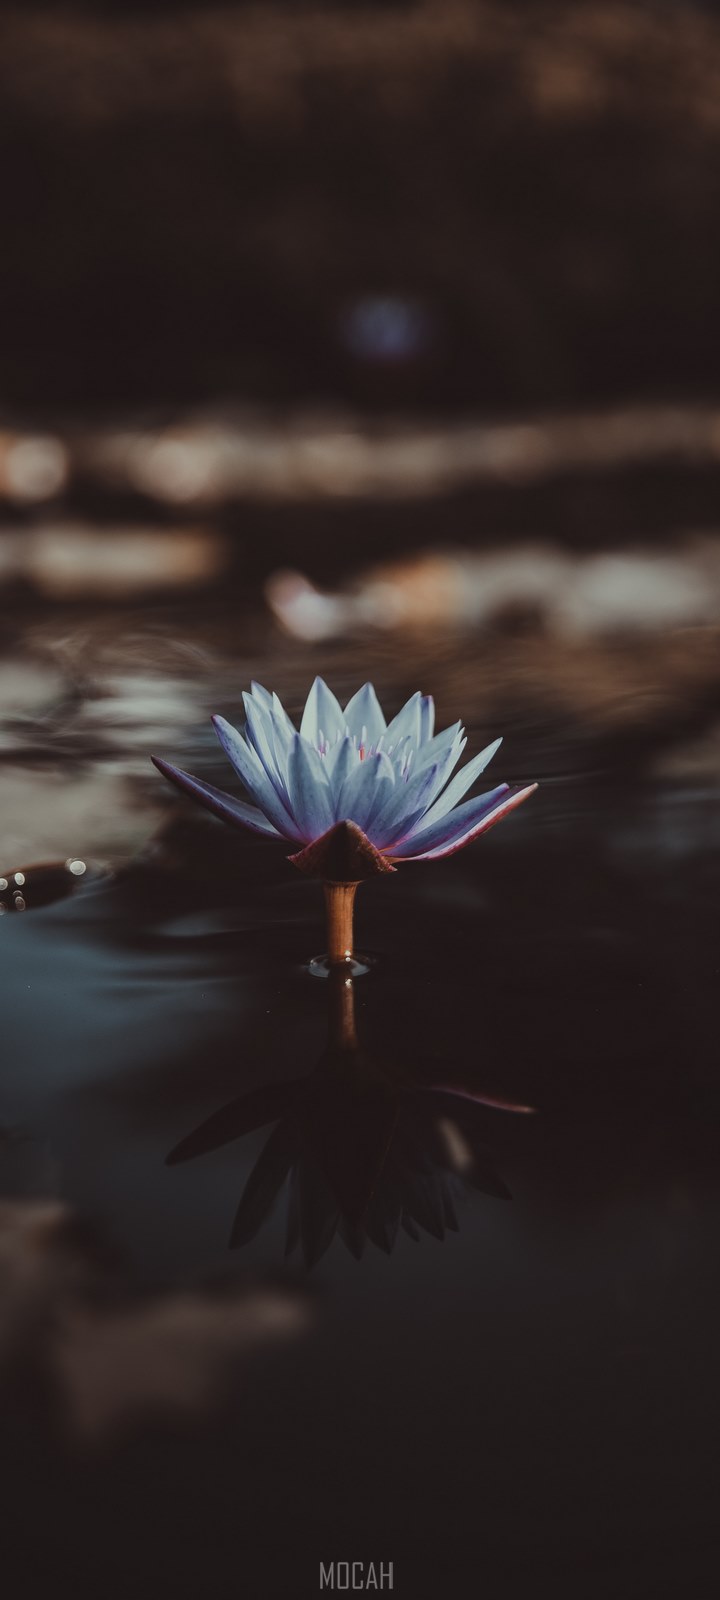 a light violet water lily jutting out from the surface of water, scared to be lonely, Realme Narzo 10A wallpaper download, 720x1600 Gallery HD Wallpaper